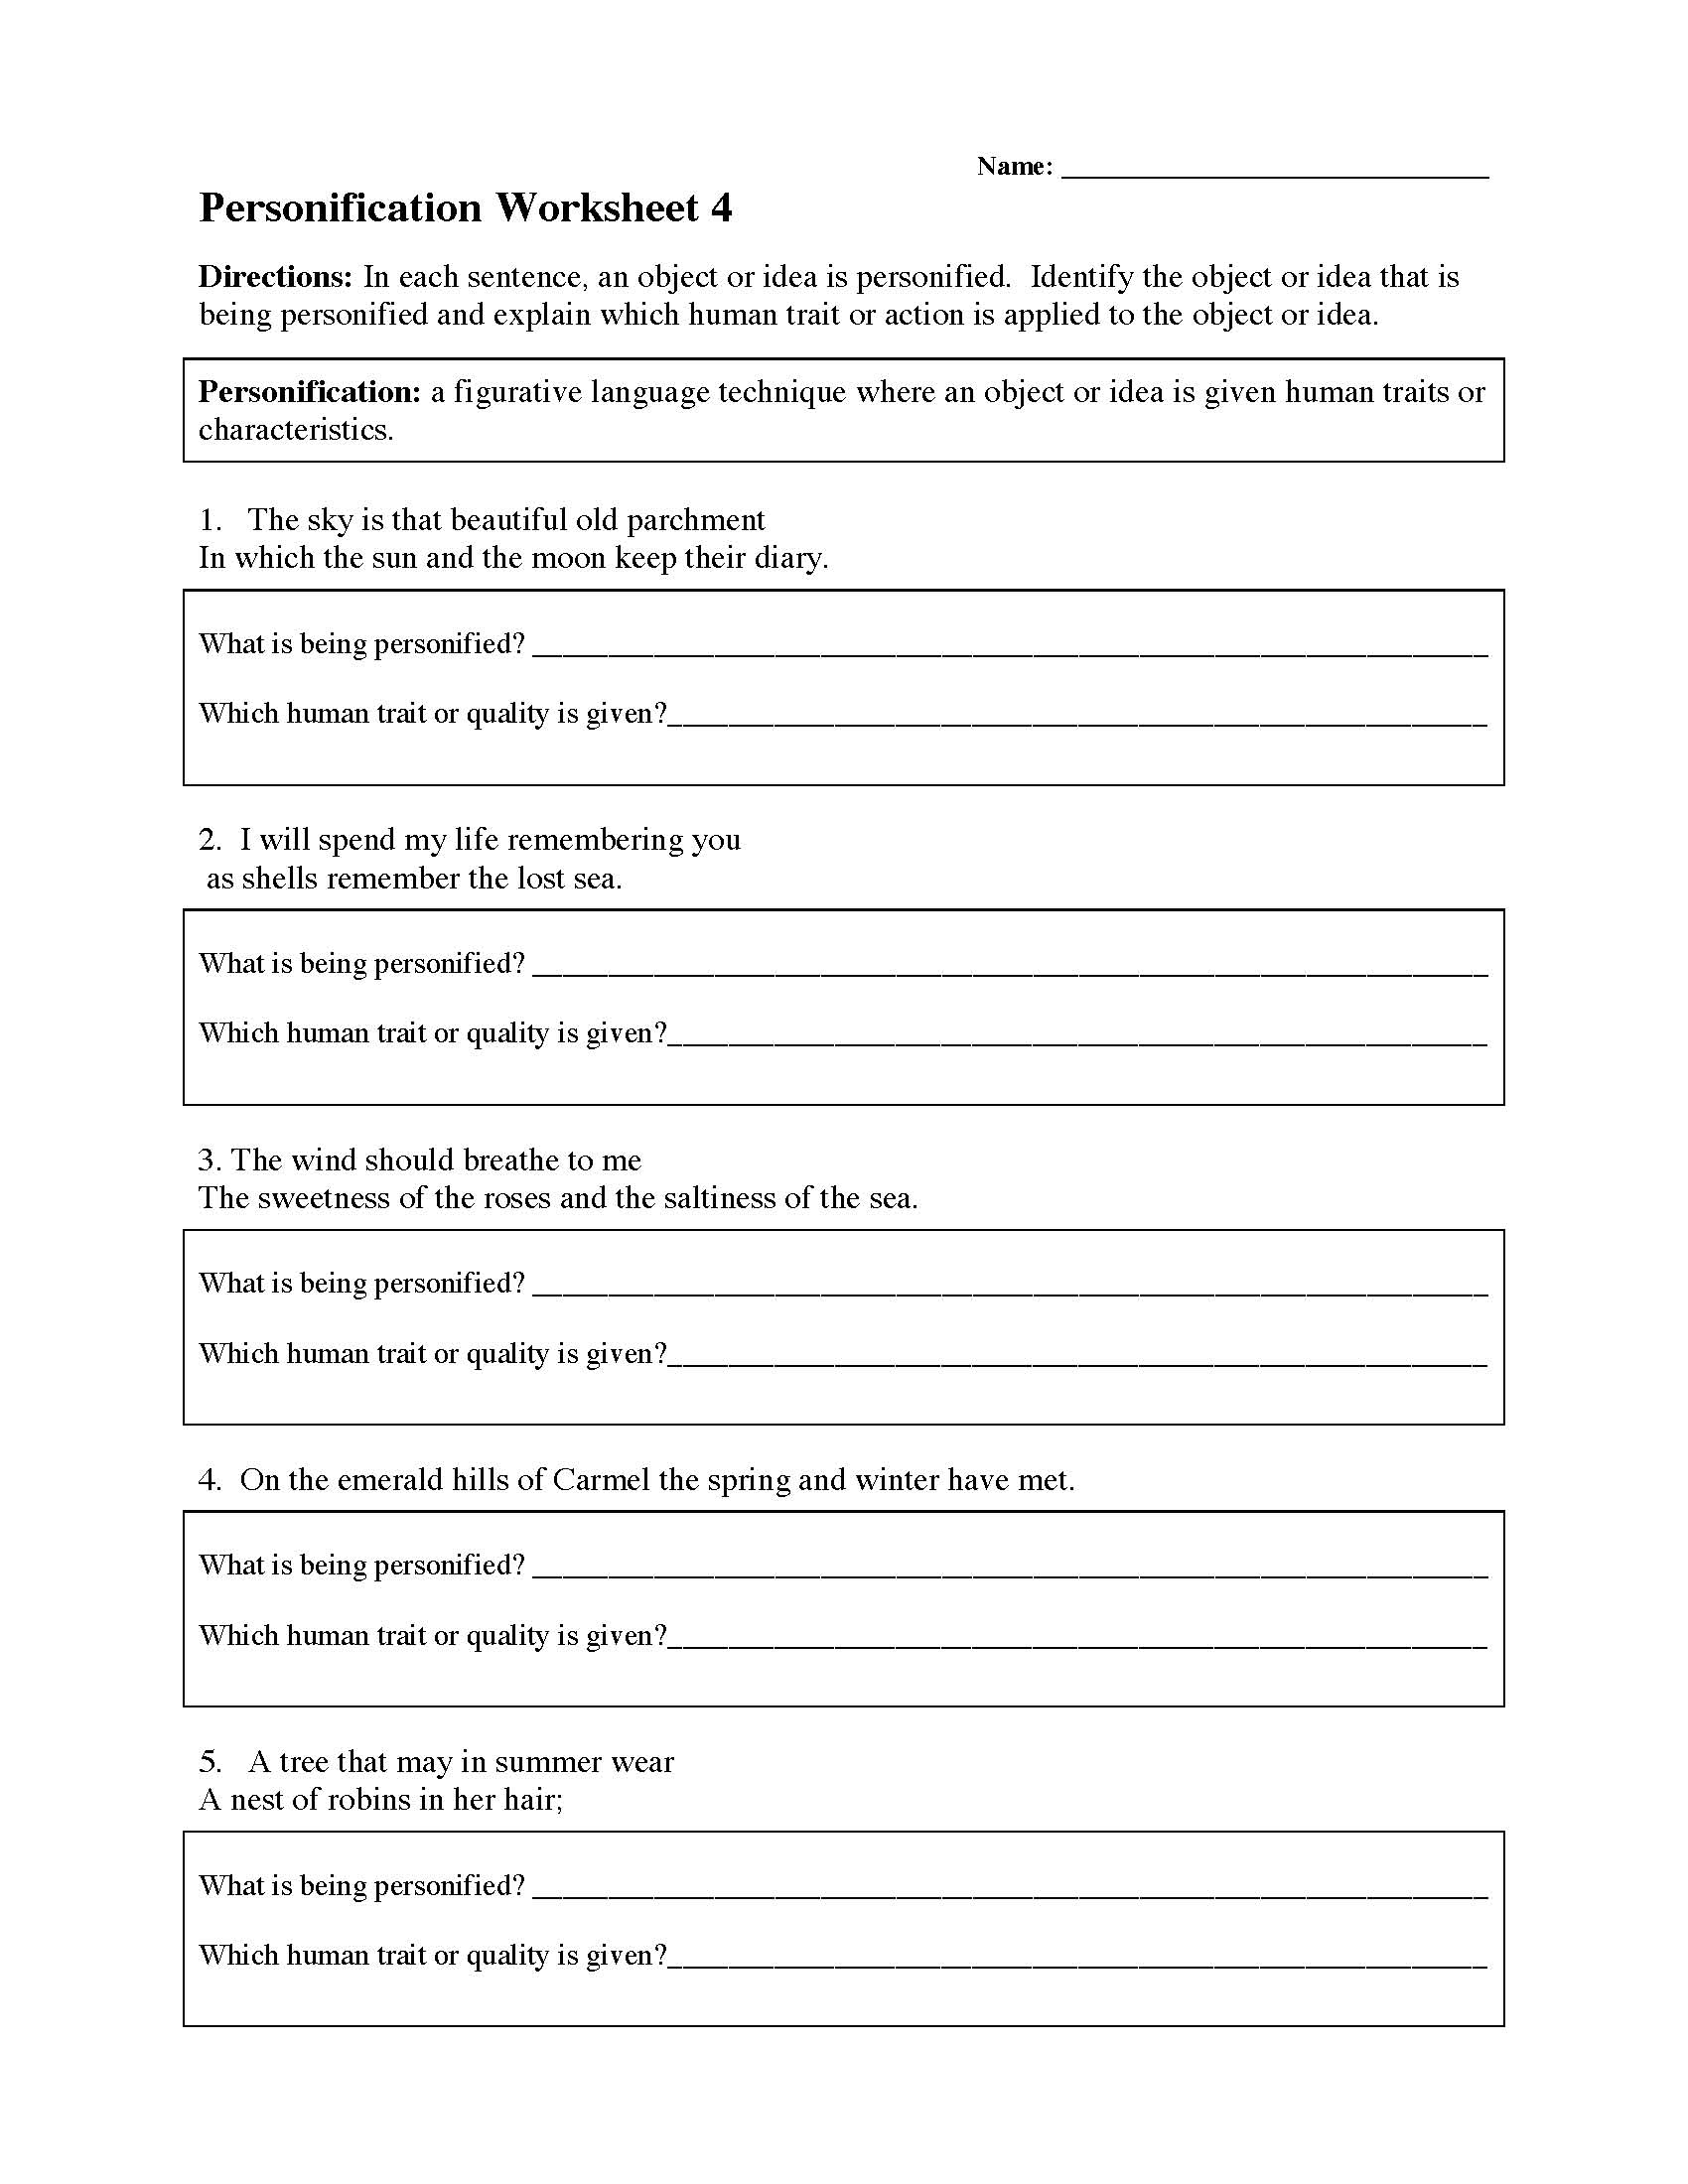 personification-worksheet-4-preview